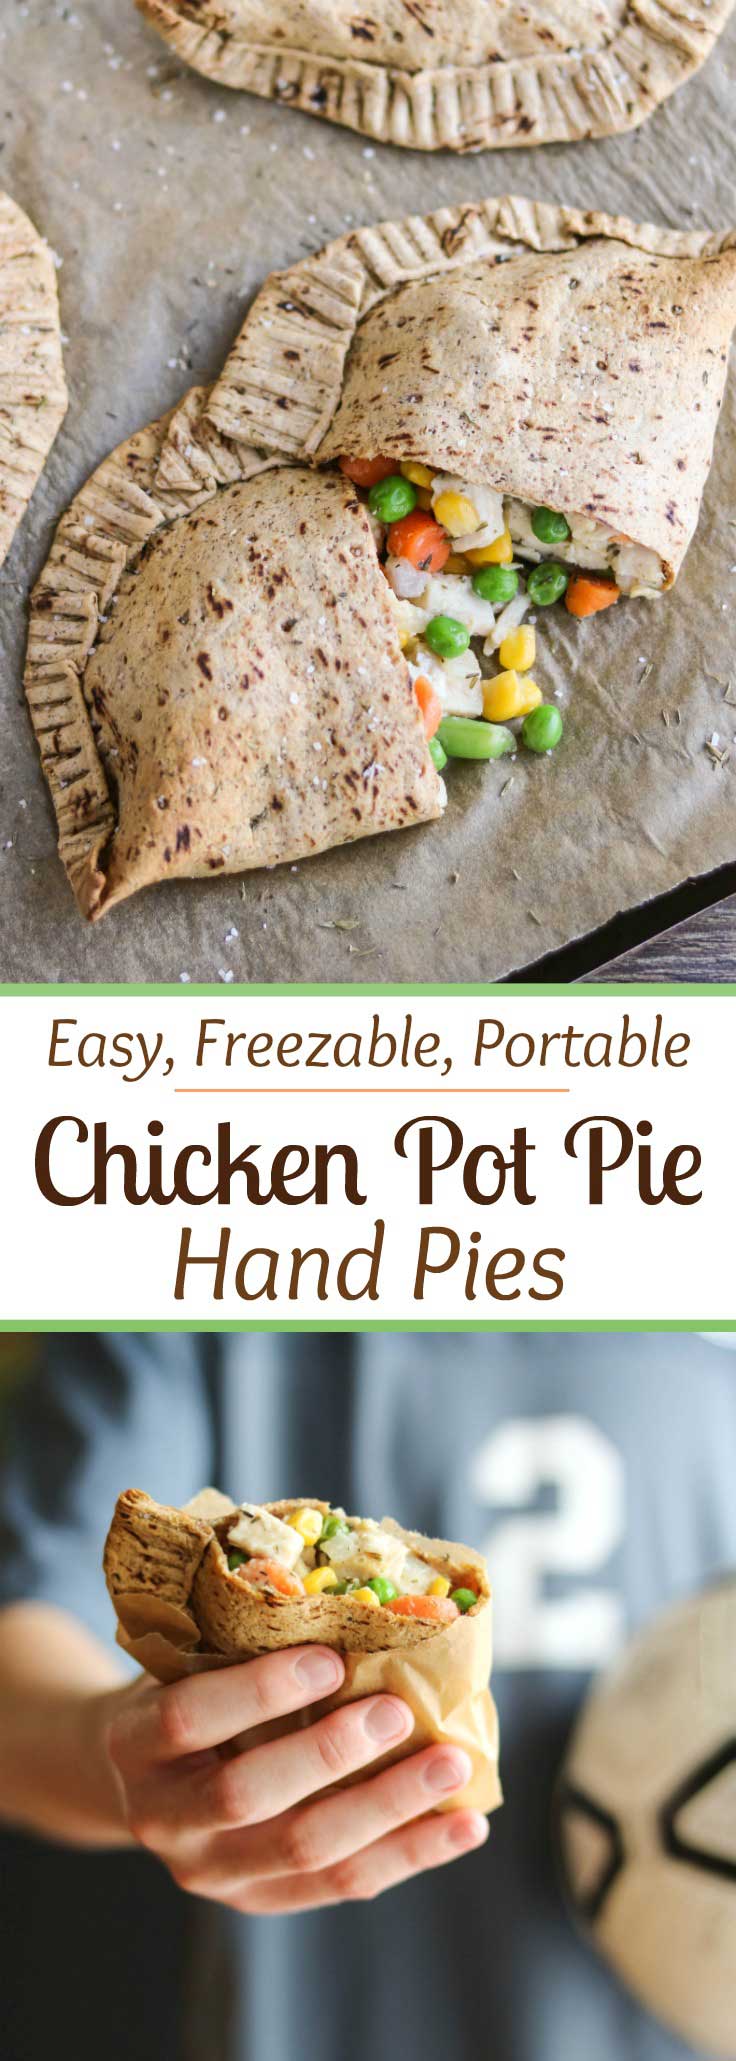 Freezable make-ahead! Perfect grab-and-go meal for busy nights! Our Easy Chicken Pot Pie Hand Pies have all the comforting, homestyle goodness of traditional chicken pot pies, but are more nutritious and totally portable. Filled with yummy (kid-friendly) veggies and chunks of tender white-meat chicken, plus a creamy (but not too messy!) sauce. All wrapped in a healthier, thyme-seasoned pot pie crust. Stock your freezer with healthy homemade "Hot Pockets"! {ad} | www.TwoHealthyKitchens.com